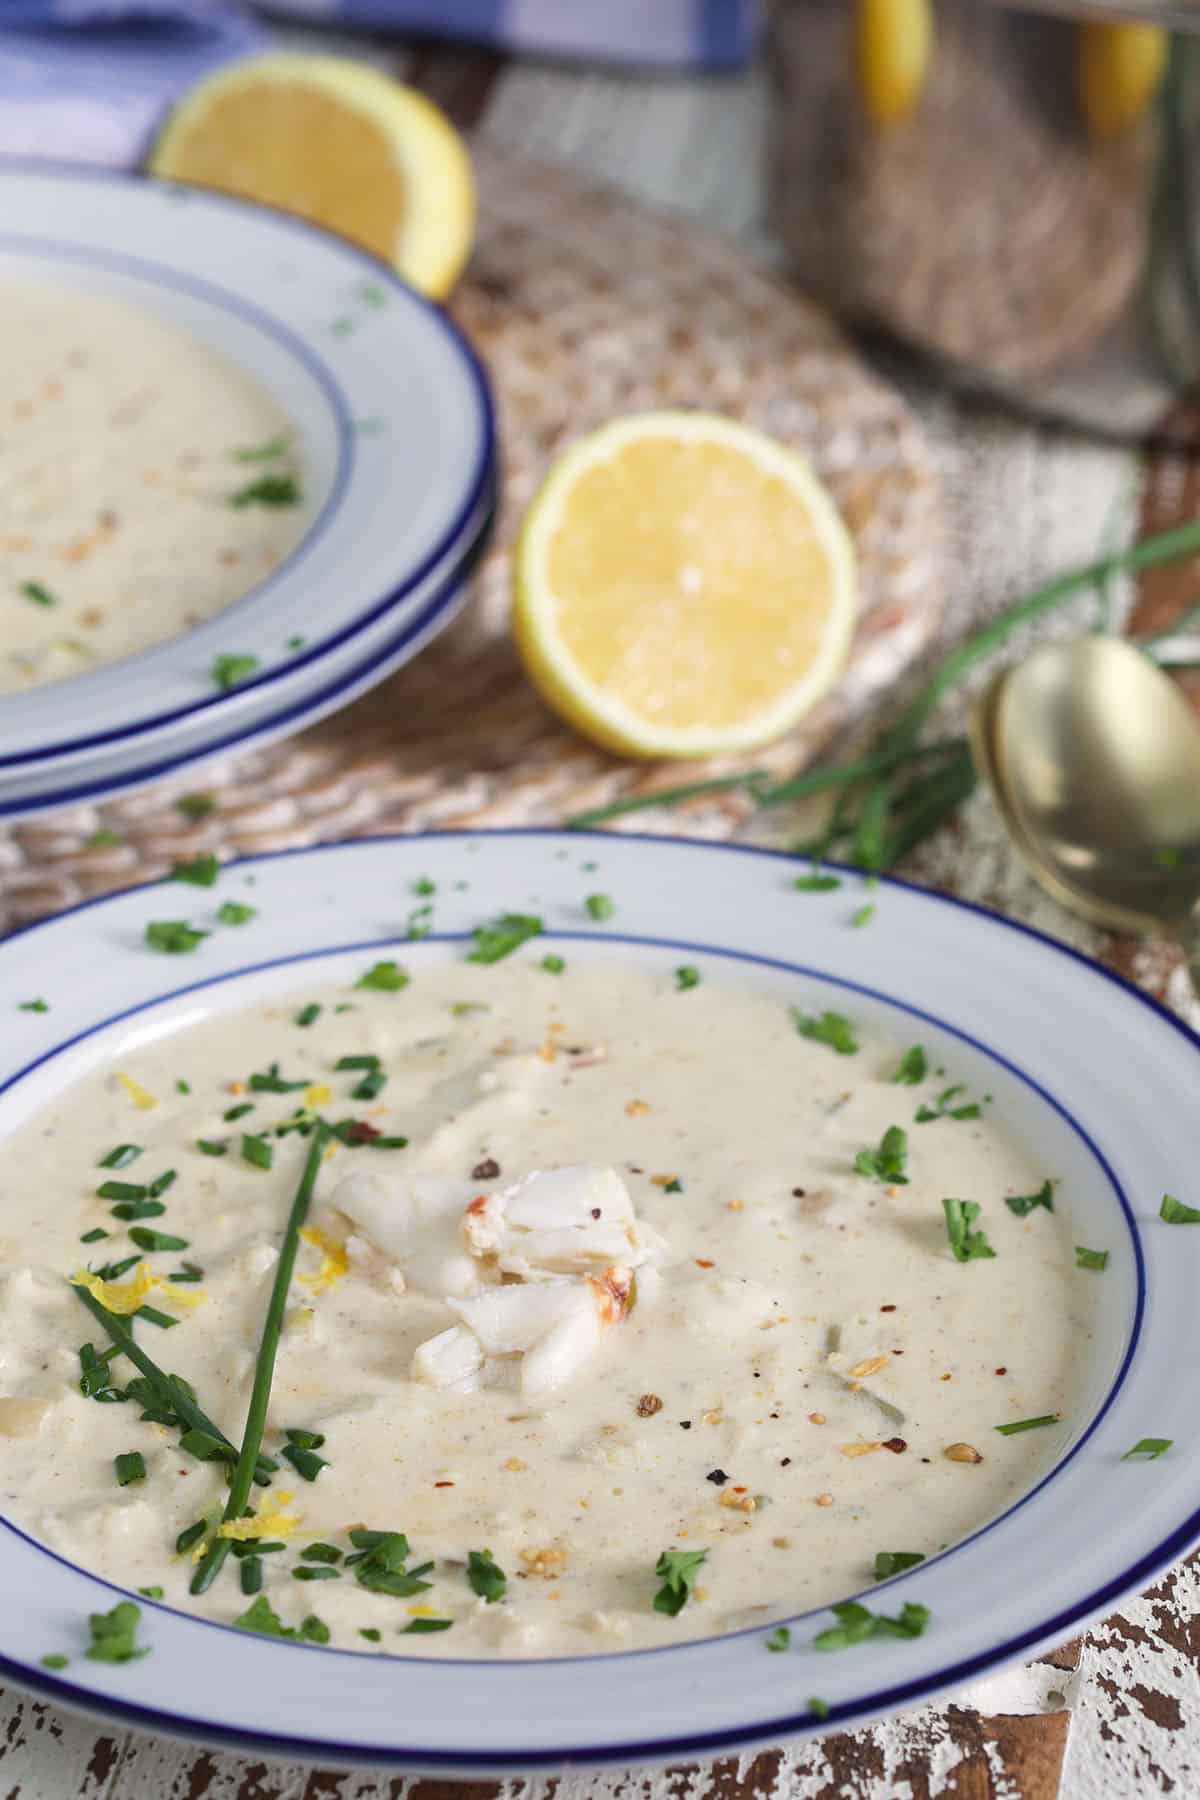 A bowl of crab soup is garnished with chives and placed next to a fresh lemon half.